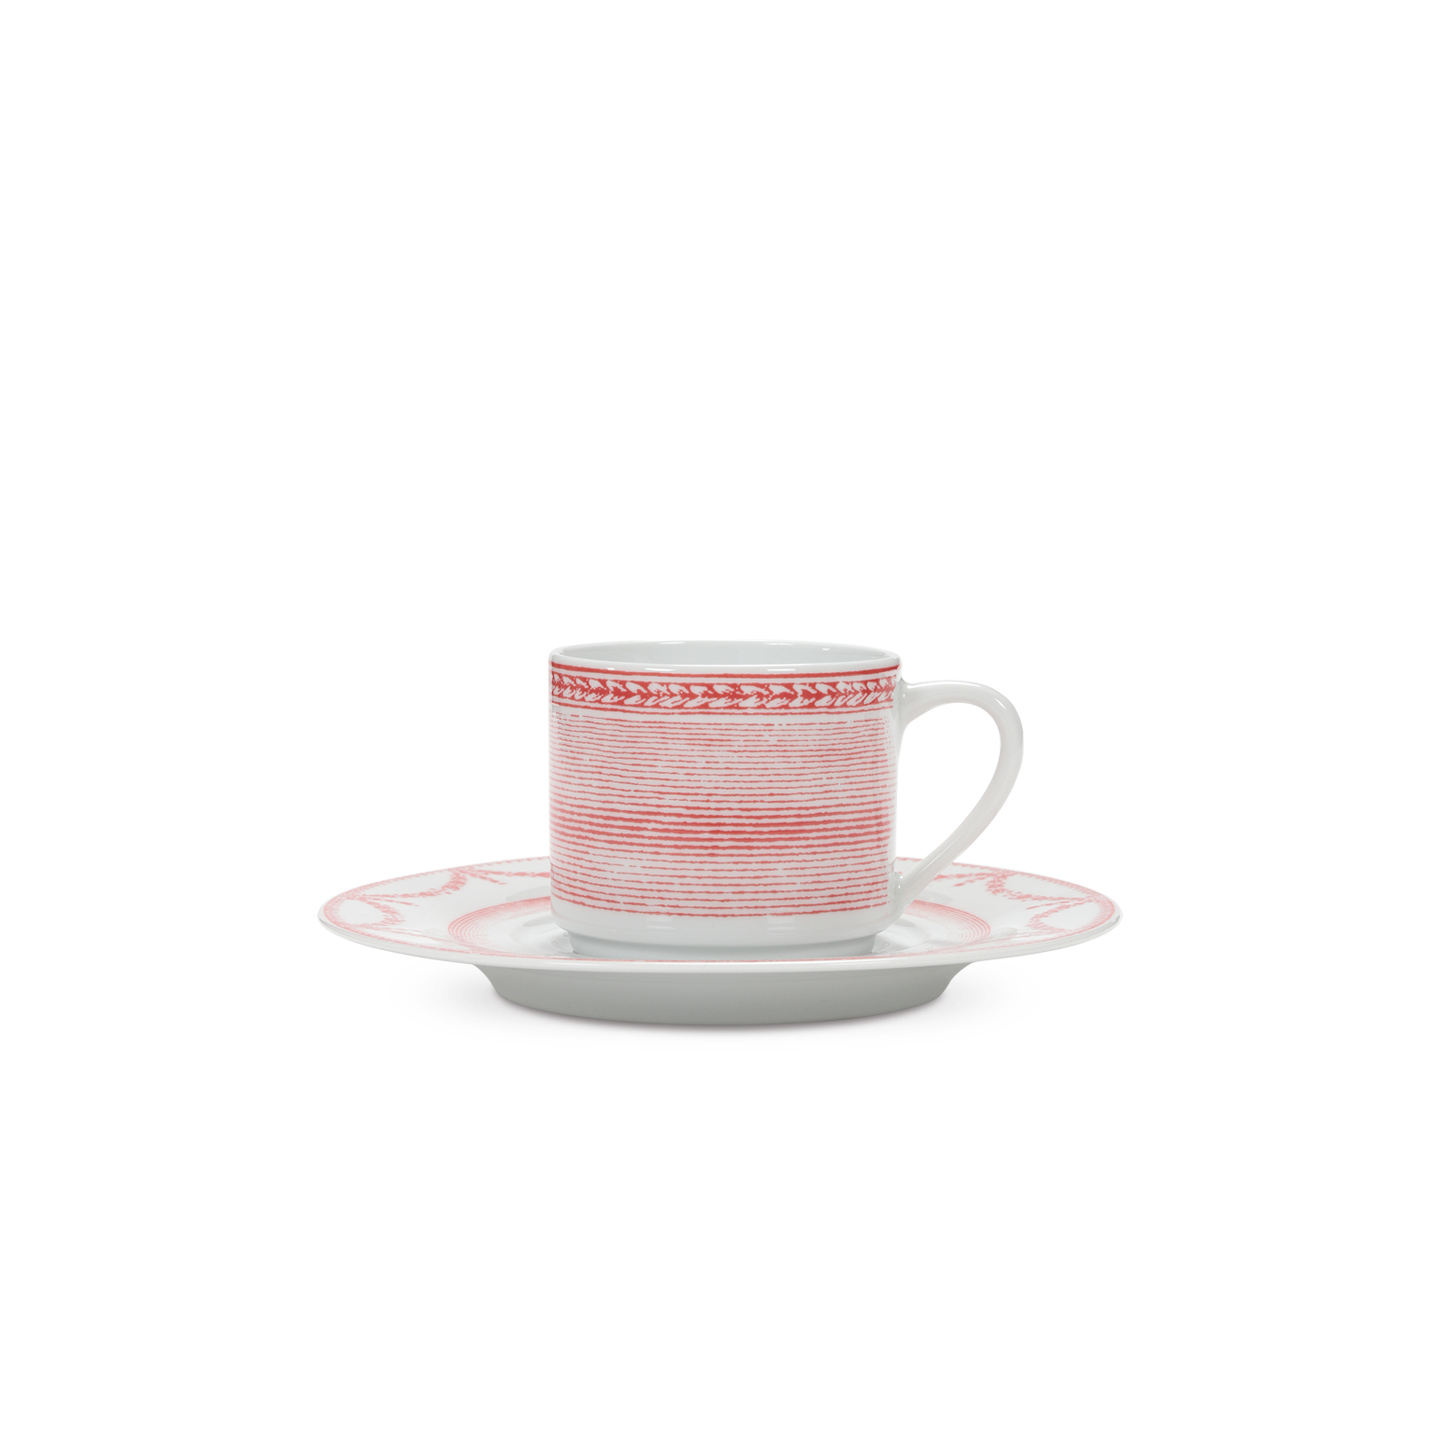 Grand Siecle Tea Cup and Saucer, Set of 4